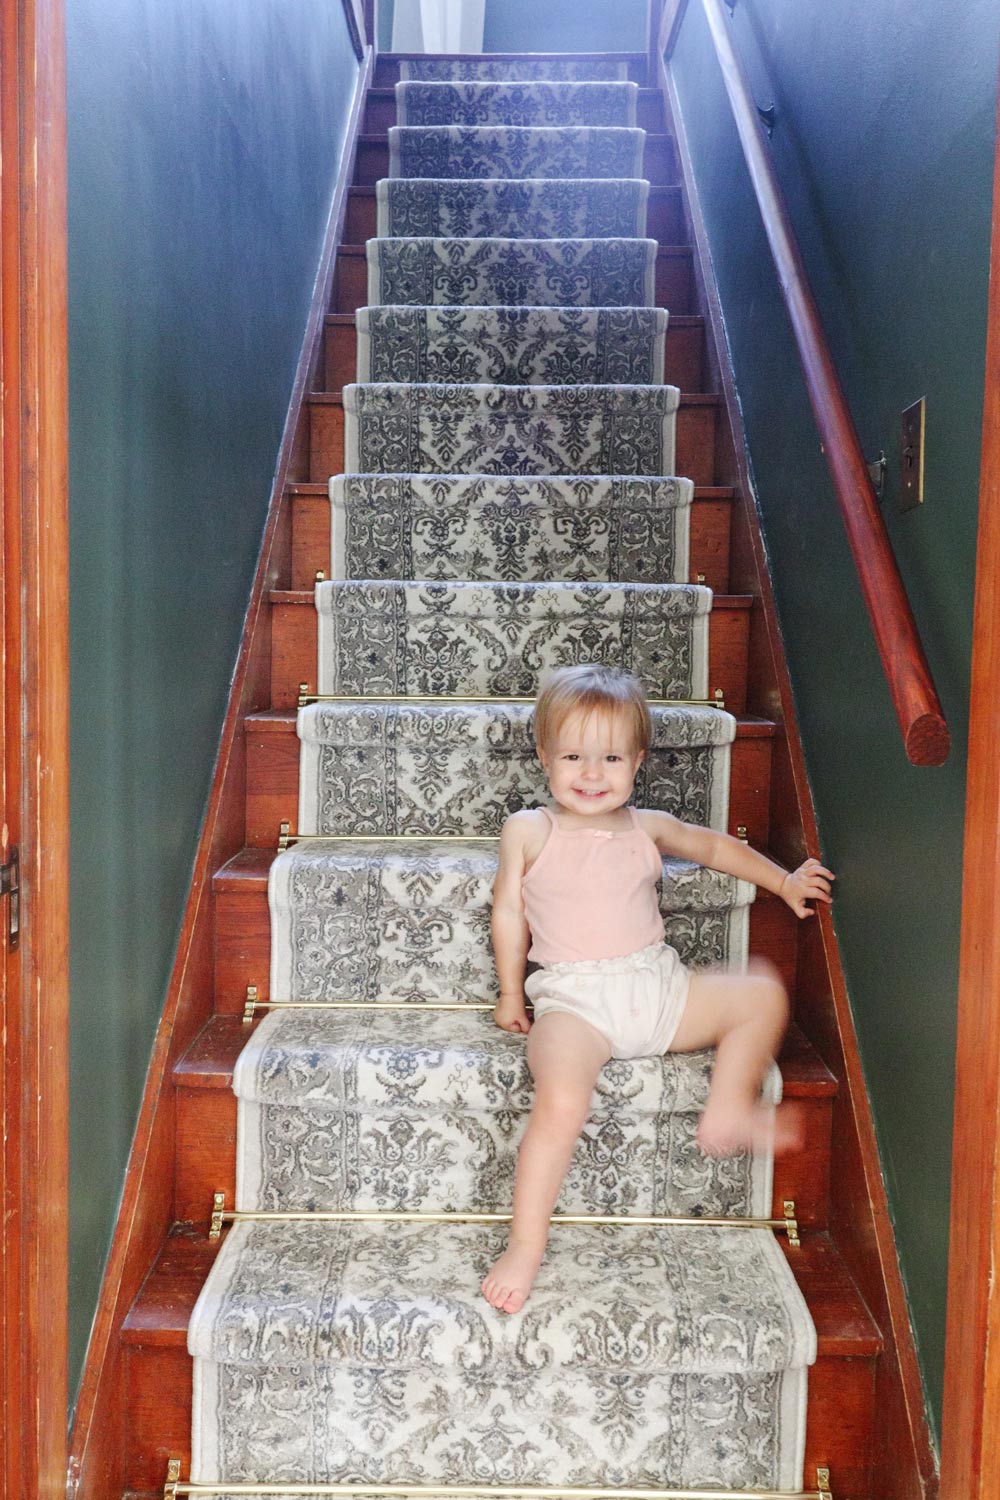 A person sitting on the completed staircase.